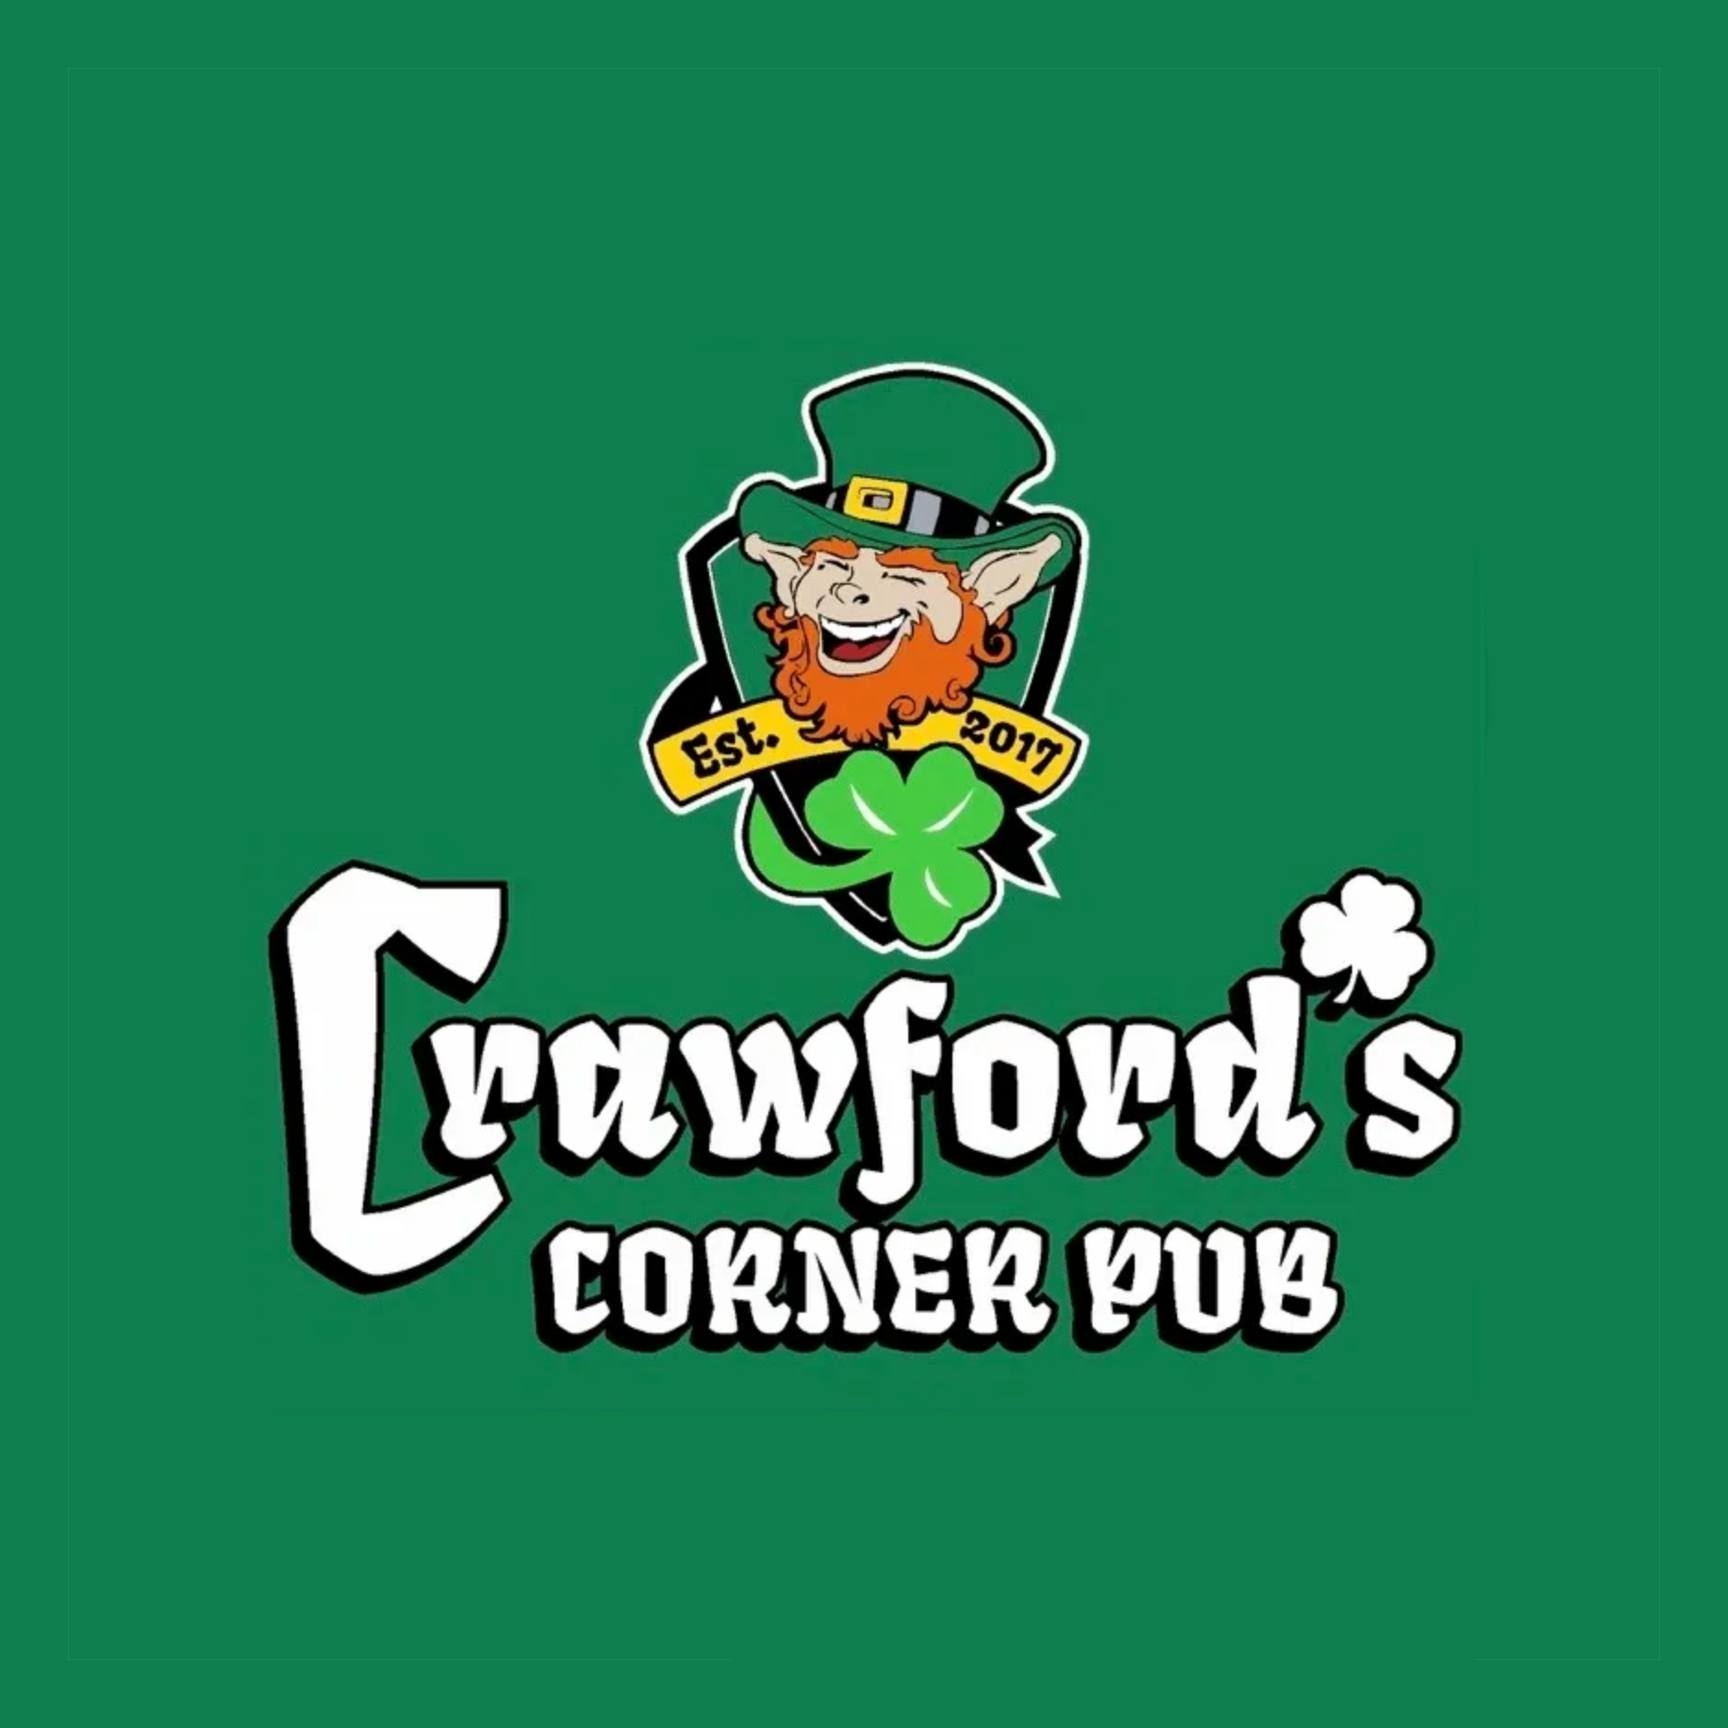 St. Patty's Day Party at Crawford's Corner Pub